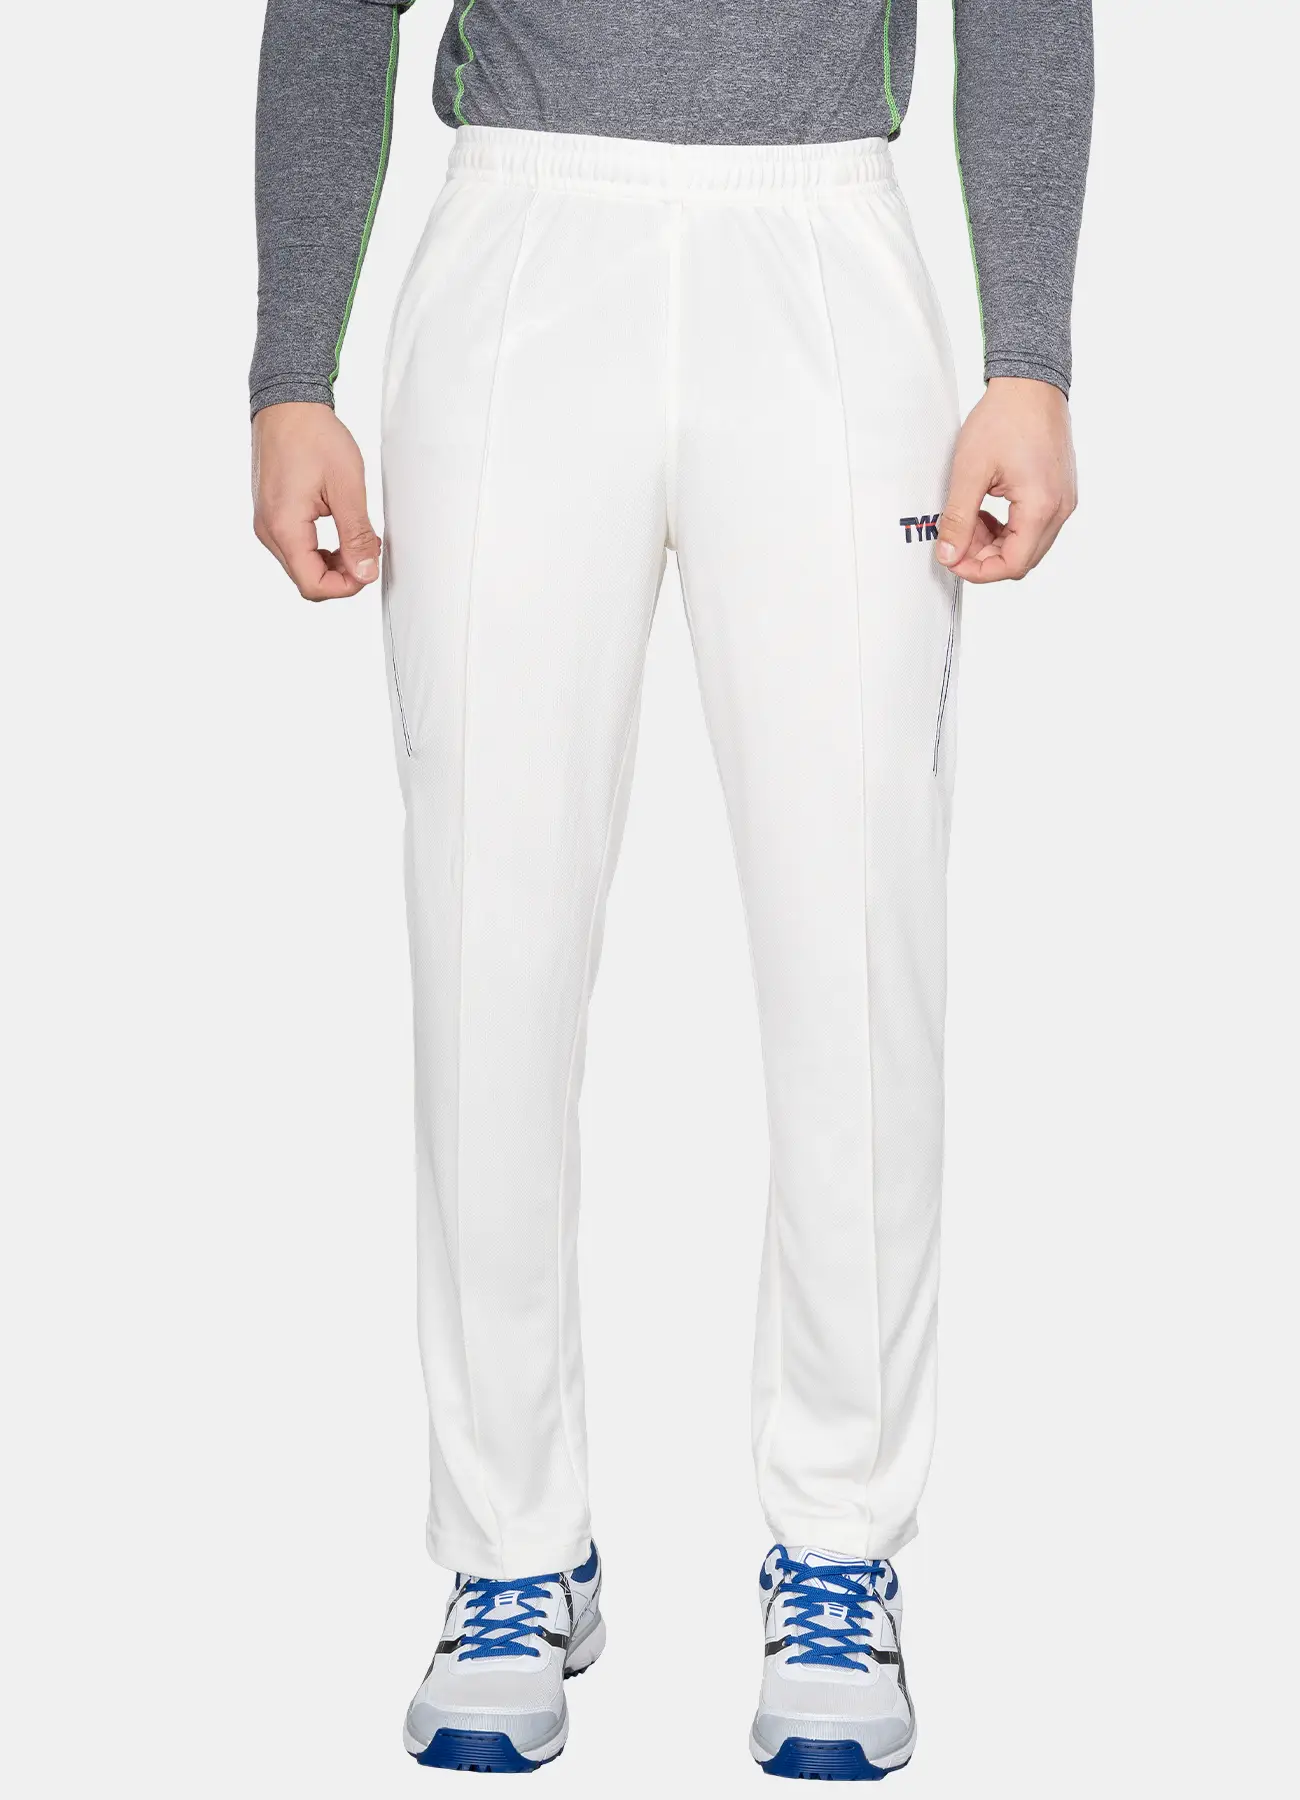 Buy High Performance Cricket Track Pants Online At Best Prices